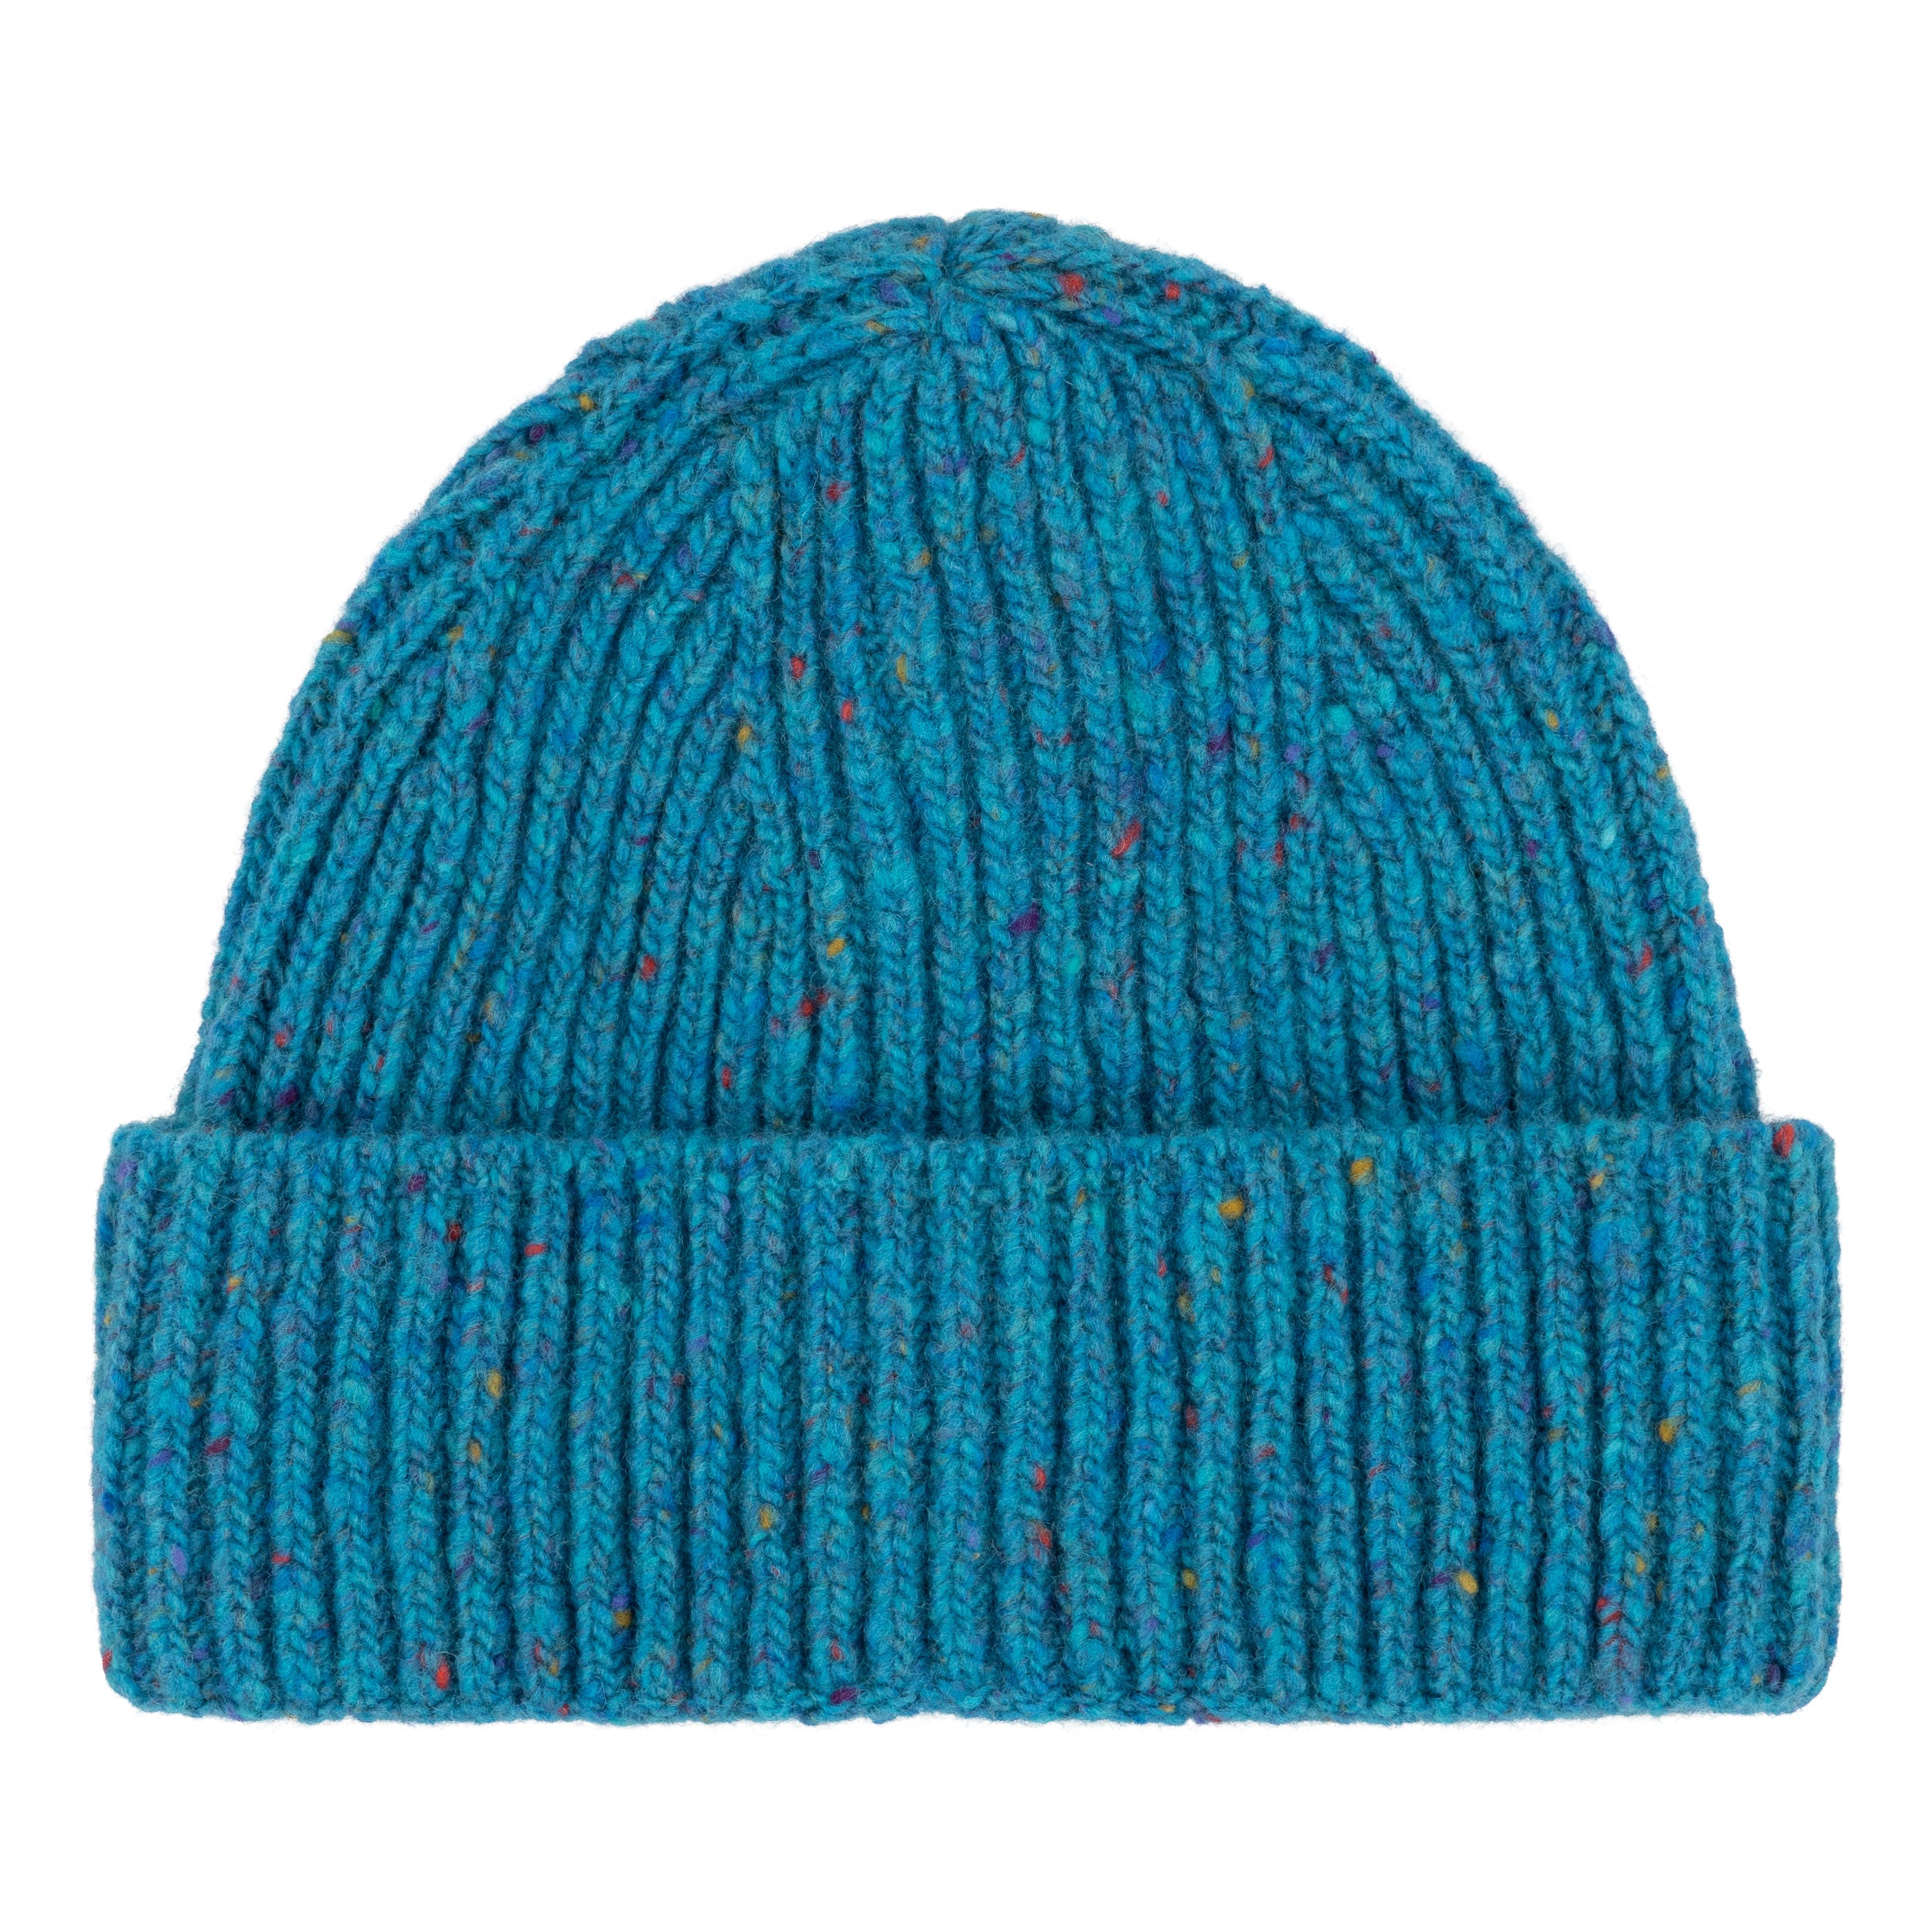 Carrier Company Donegal Wool Hat in Turquoise